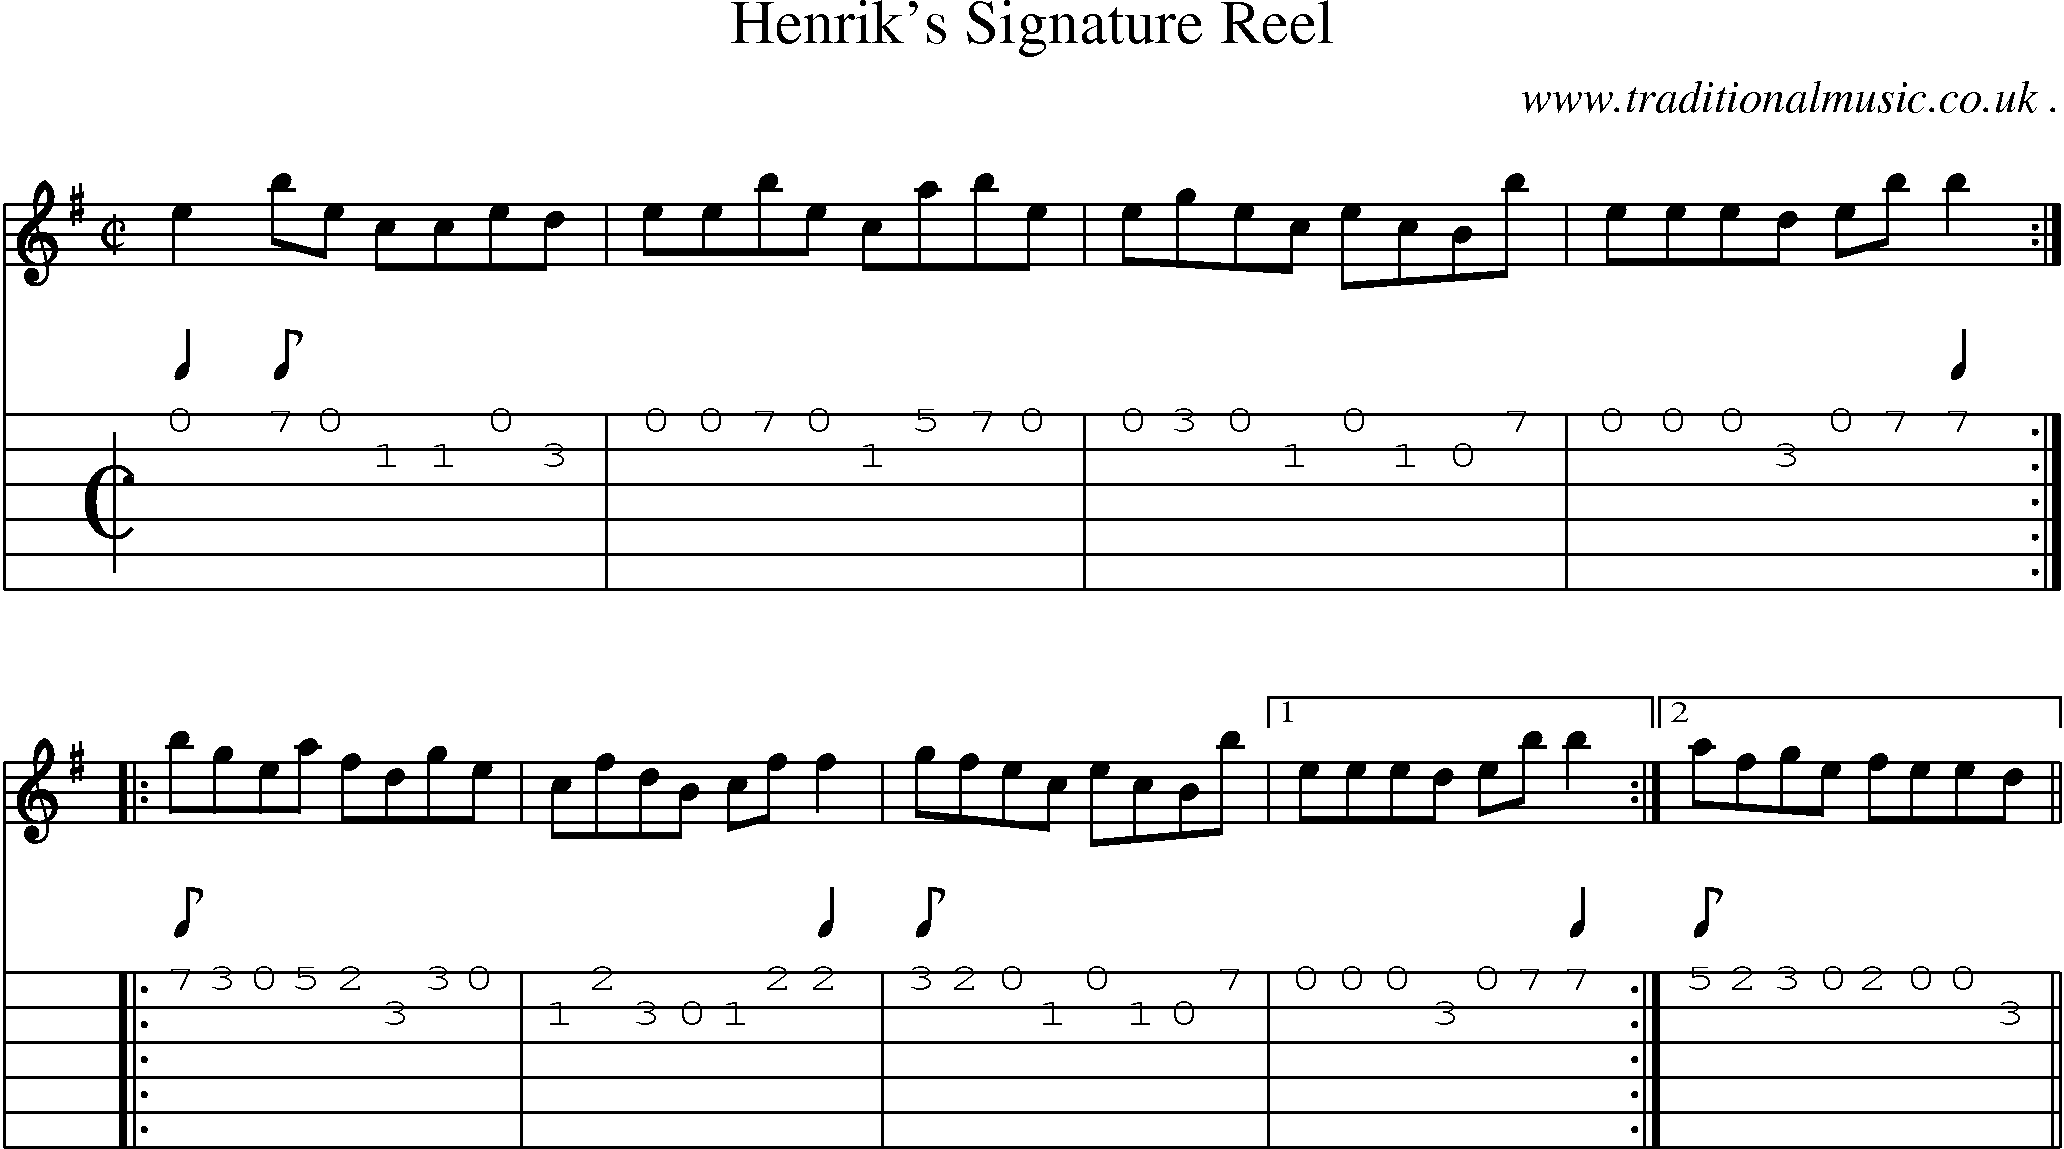 Sheet-Music and Guitar Tabs for Henriks Signature Reel